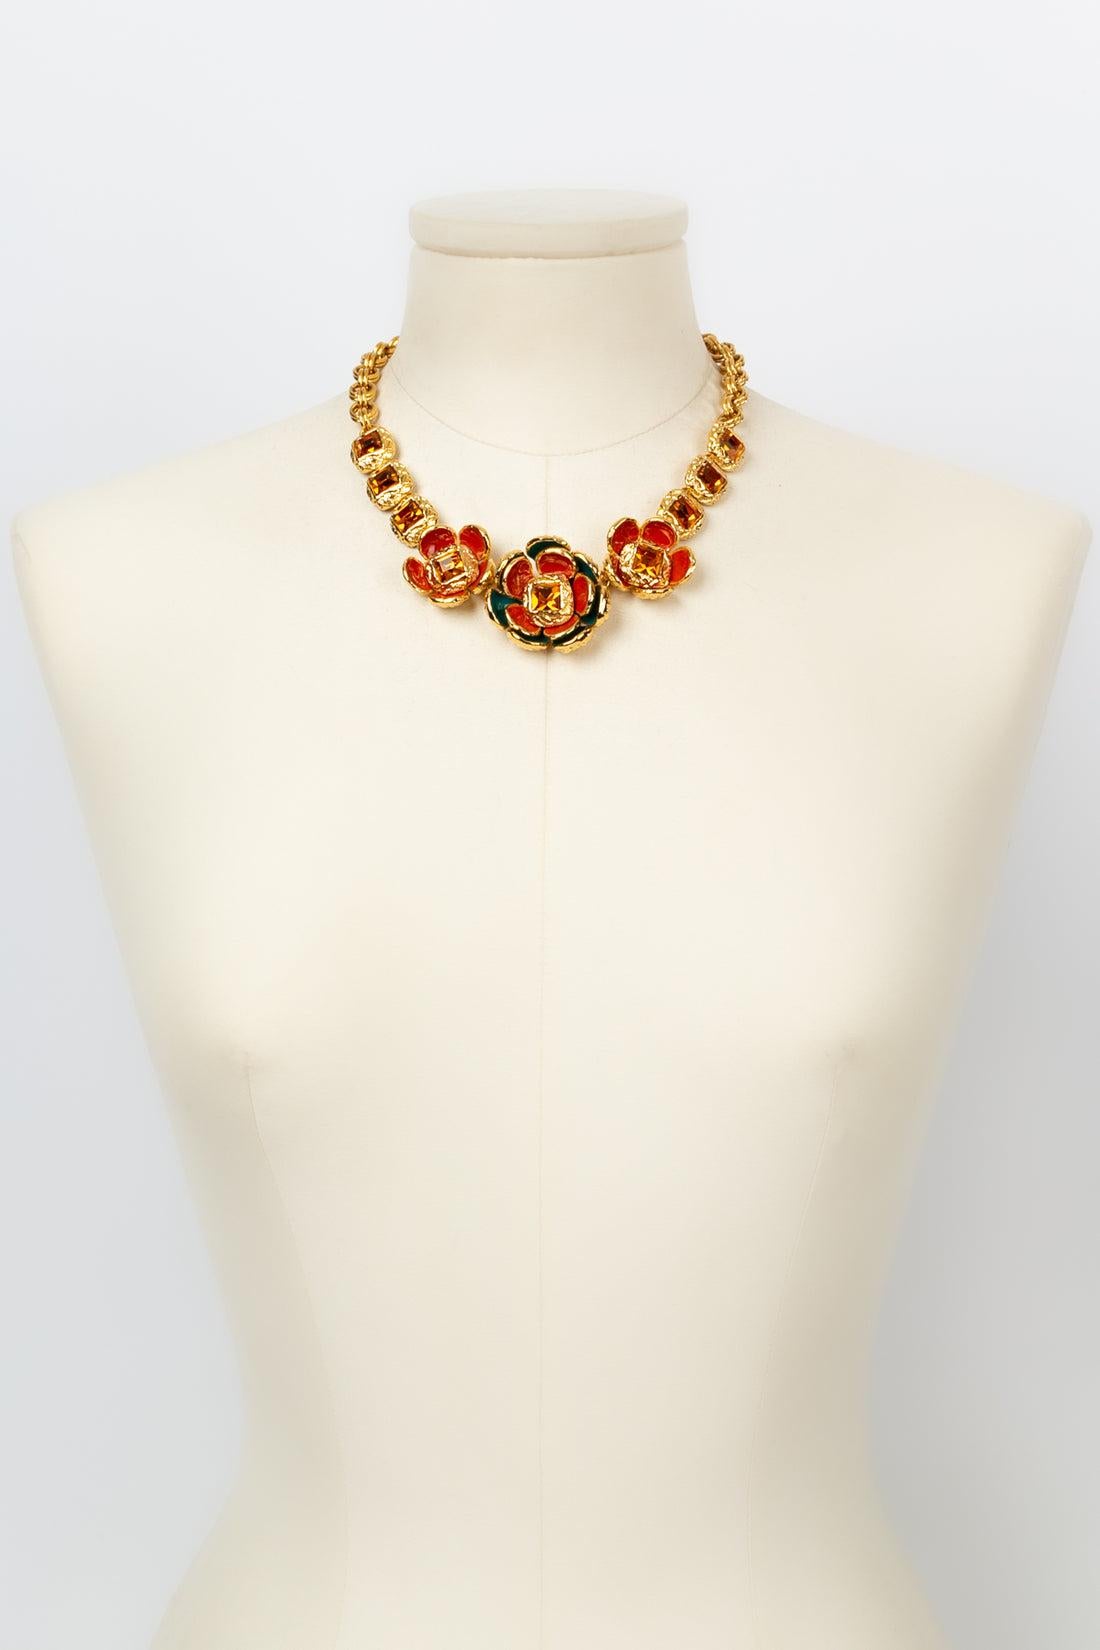 Yves Saint Laurent (Made in France) Short gilded metal necklace decorated with red and green enameled flowers paved with orange rhinestones.

Additional information: 
Dimensions: Length: 40 cm to 45 cm (15.74